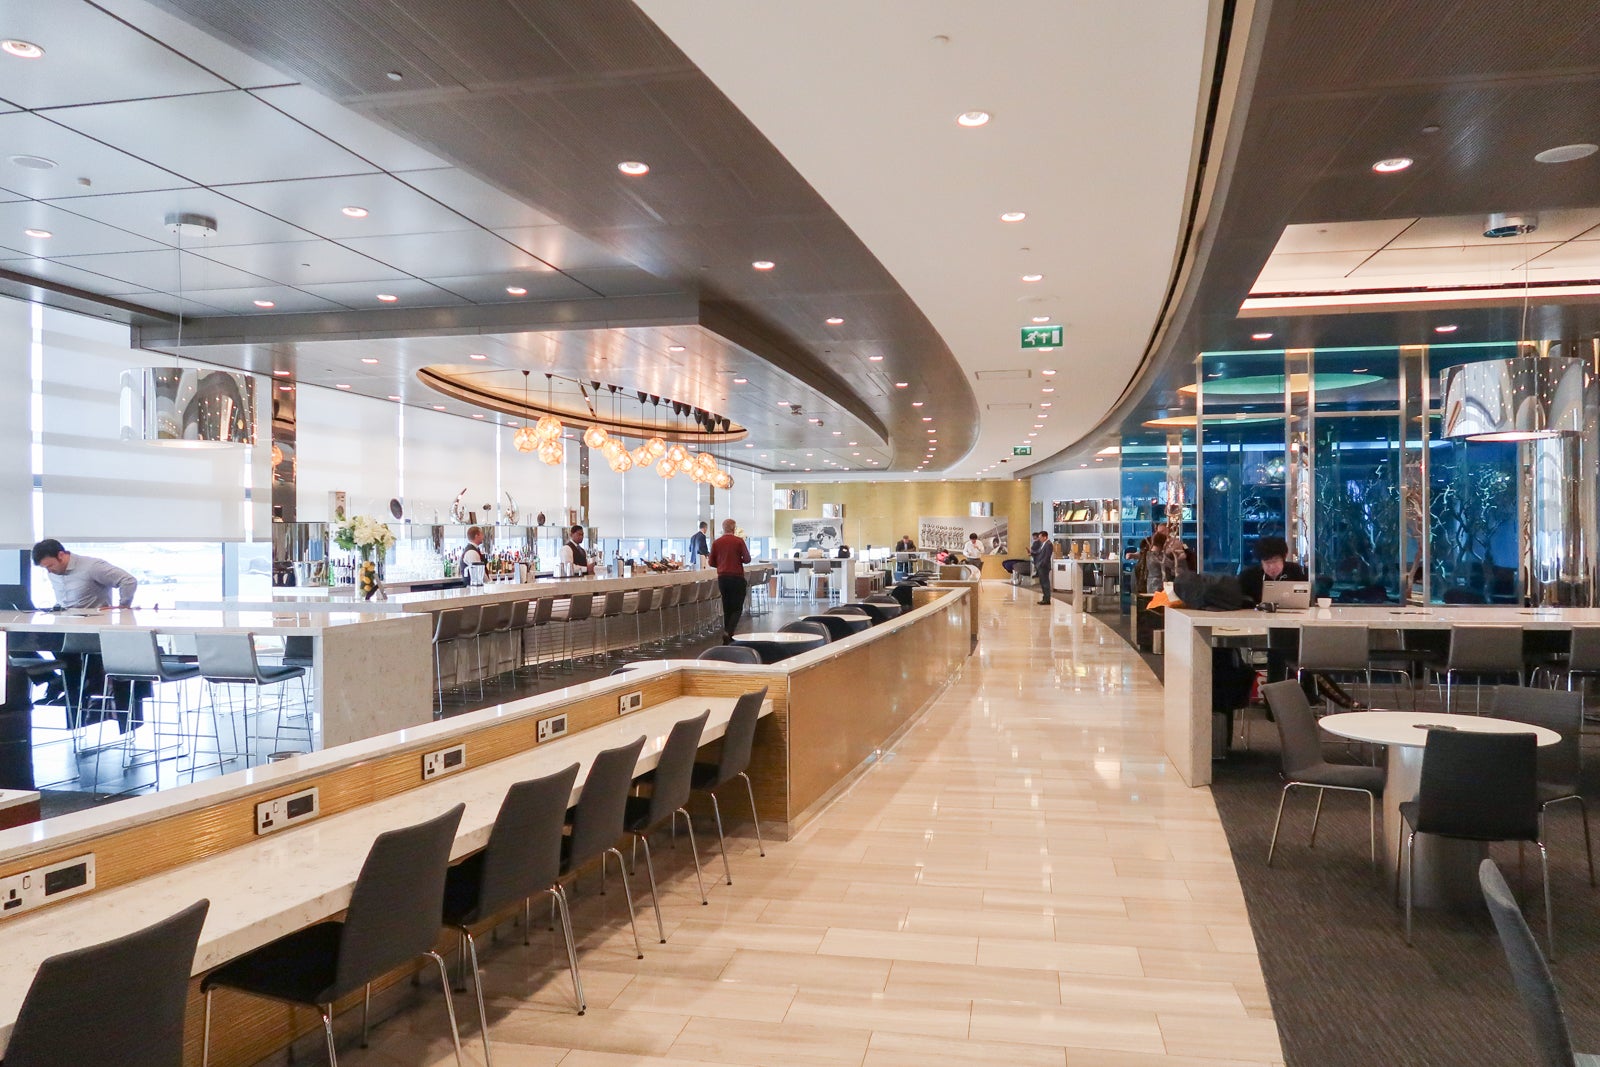 United Club guide: How to get access and more - The Points Guy - The Points  Guy